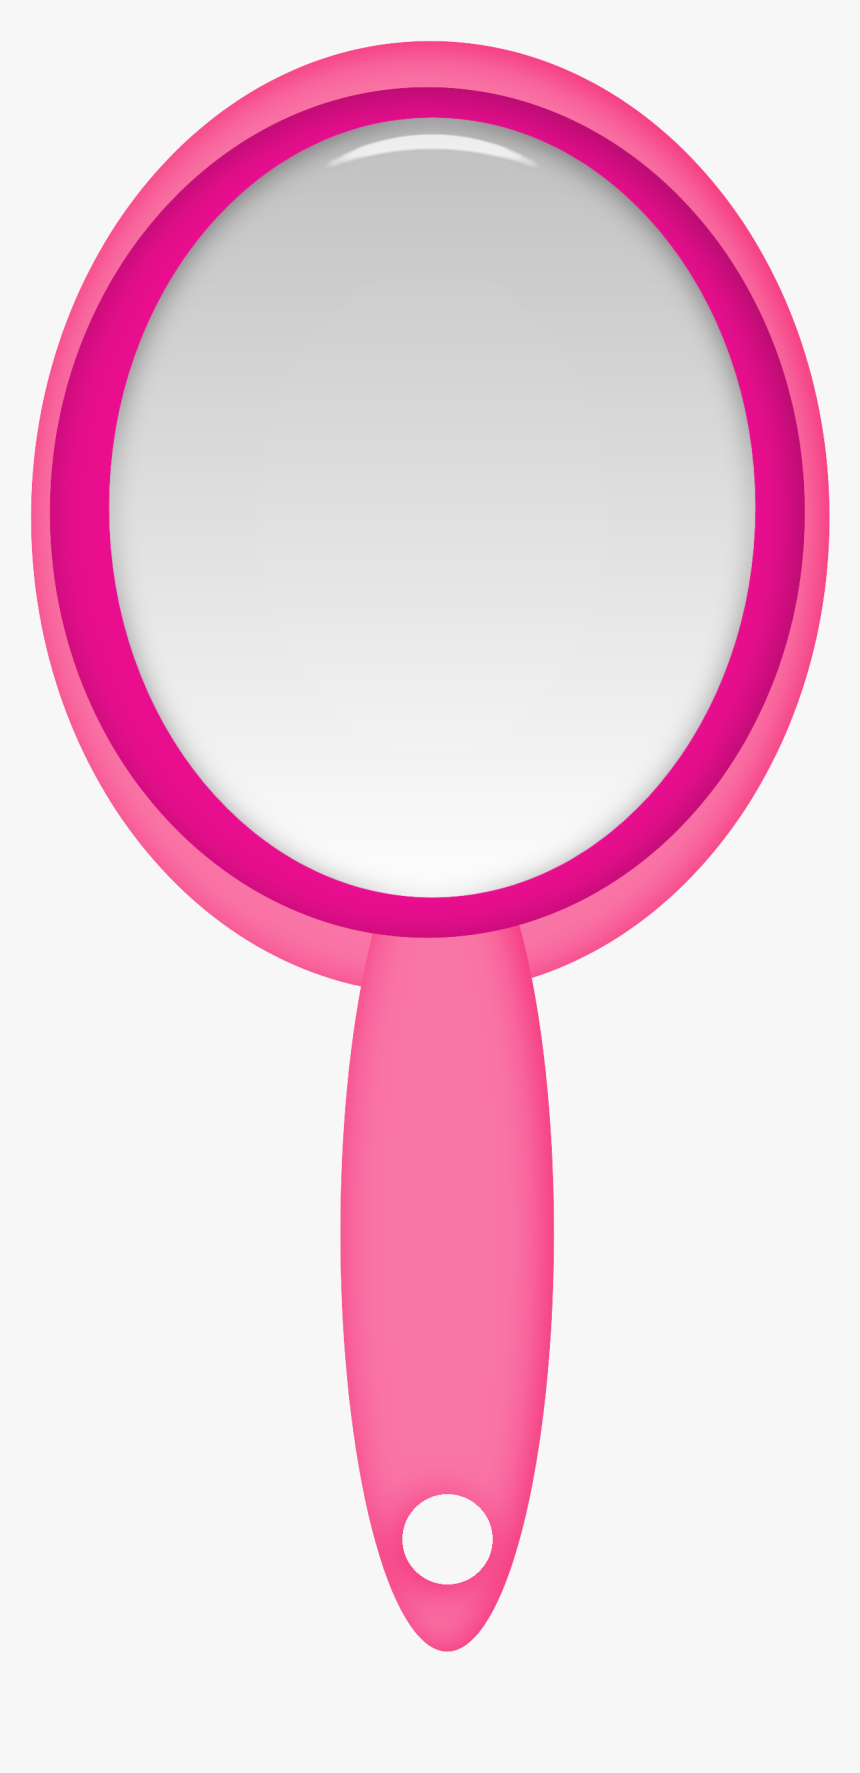 Mirror Clipart Girly - Transparent Mirror Clip Art, HD Png Download, Free Download